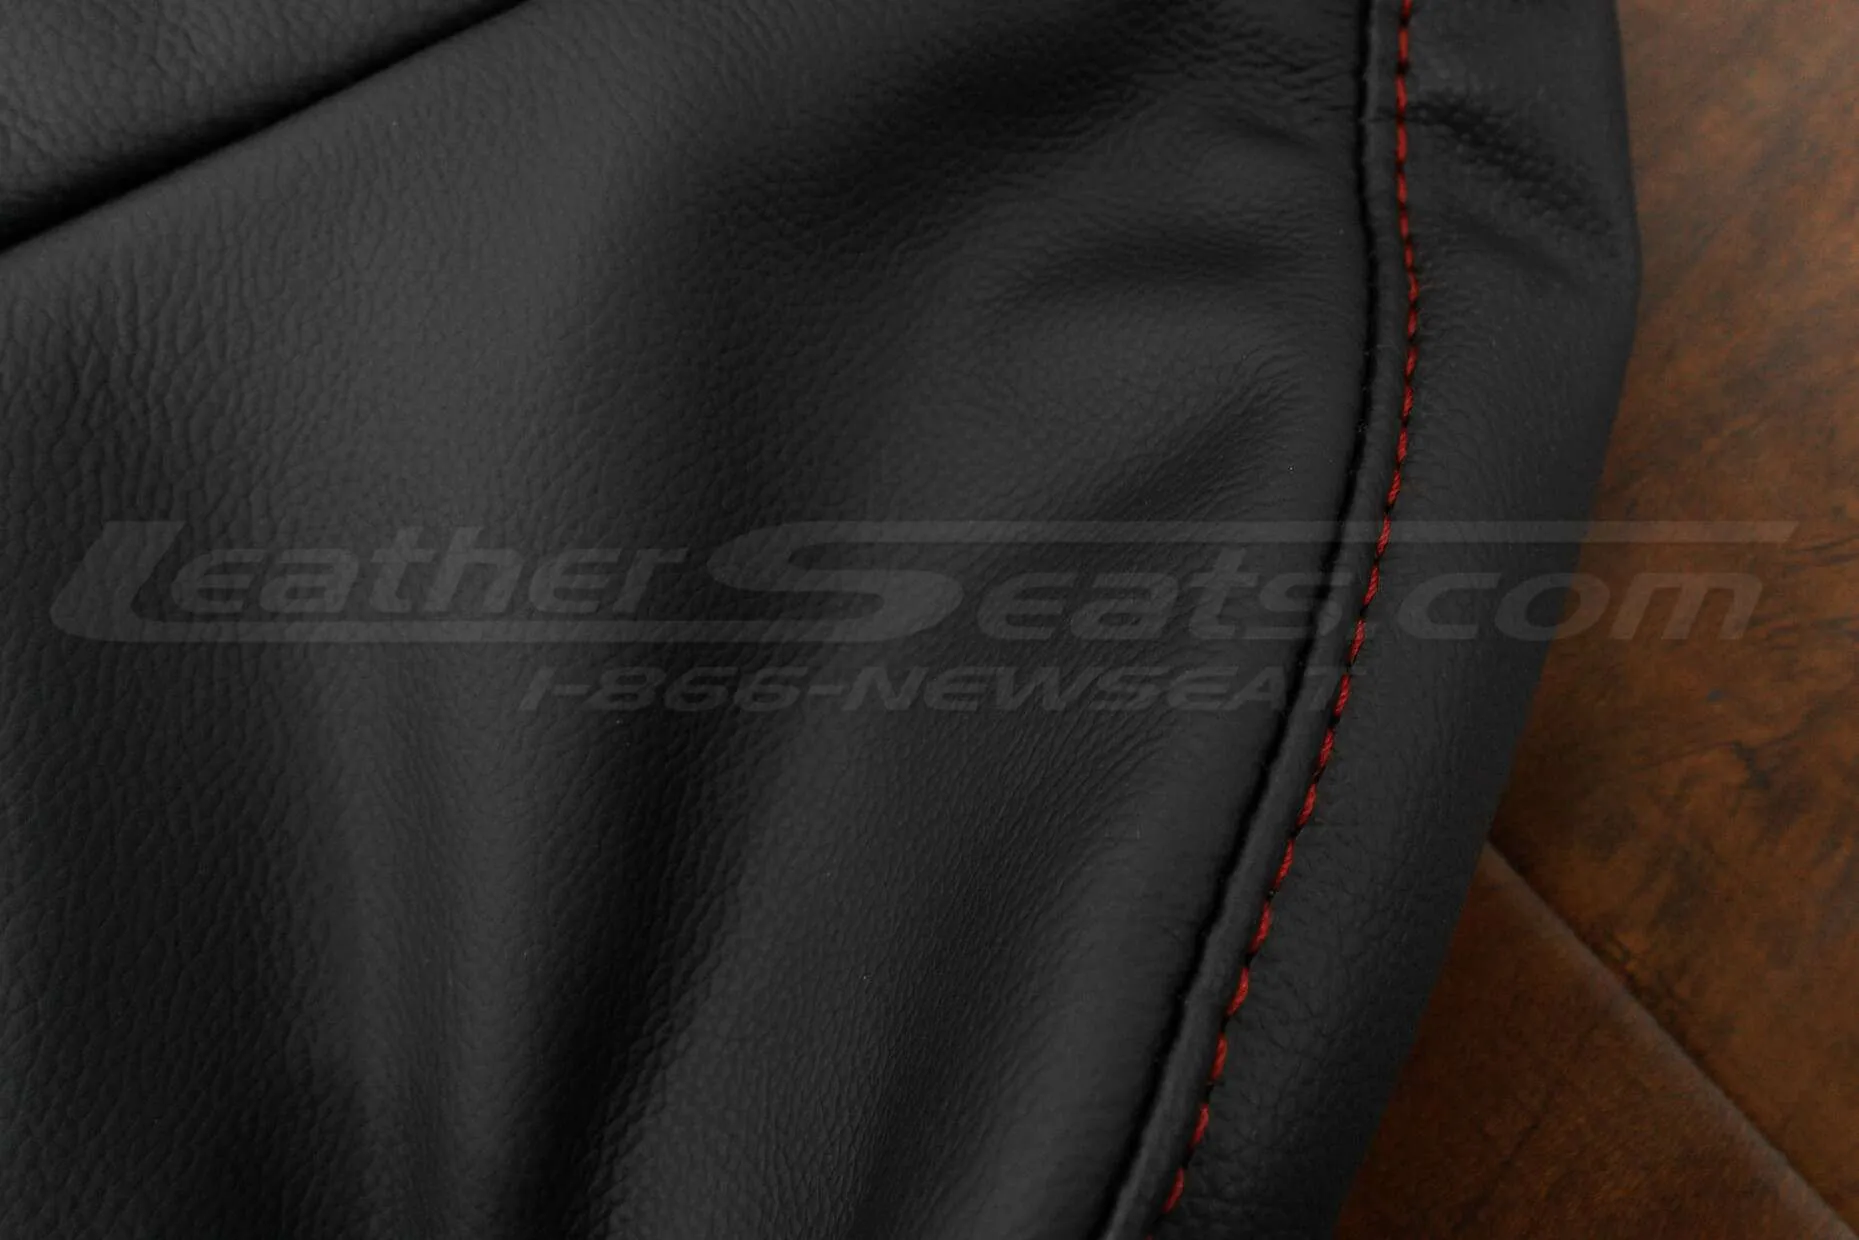 Honda S2000 Roadster Upholstery Kit - Black & Red - Side red stitching